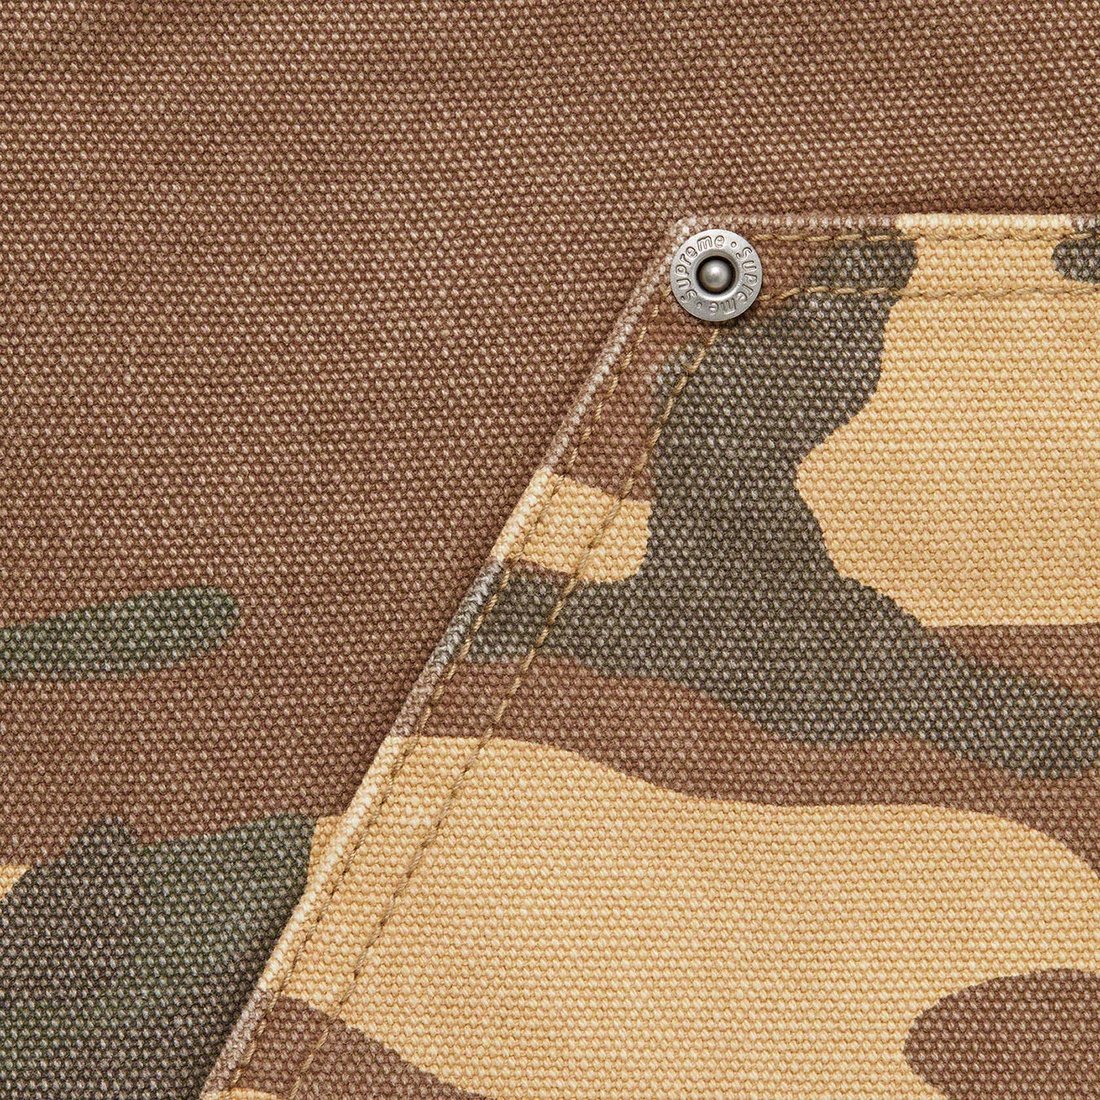 Details on Double Knee Painter Pant Woodland Camo from spring summer
                                                    2023 (Price is $168)